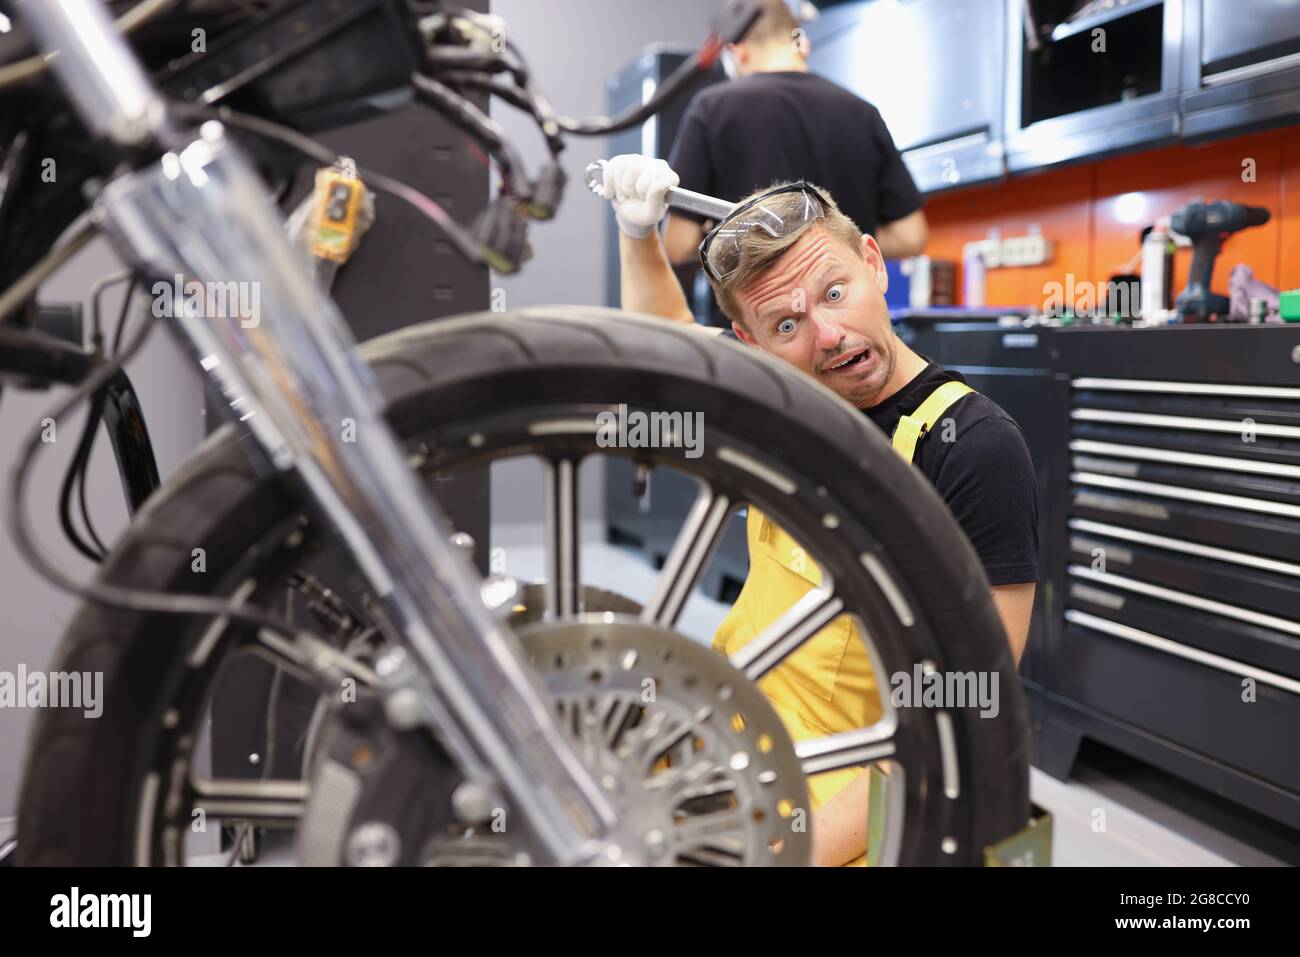 Pensive locksmith holds wrench and looks at motorcycle wheel Stock Photo